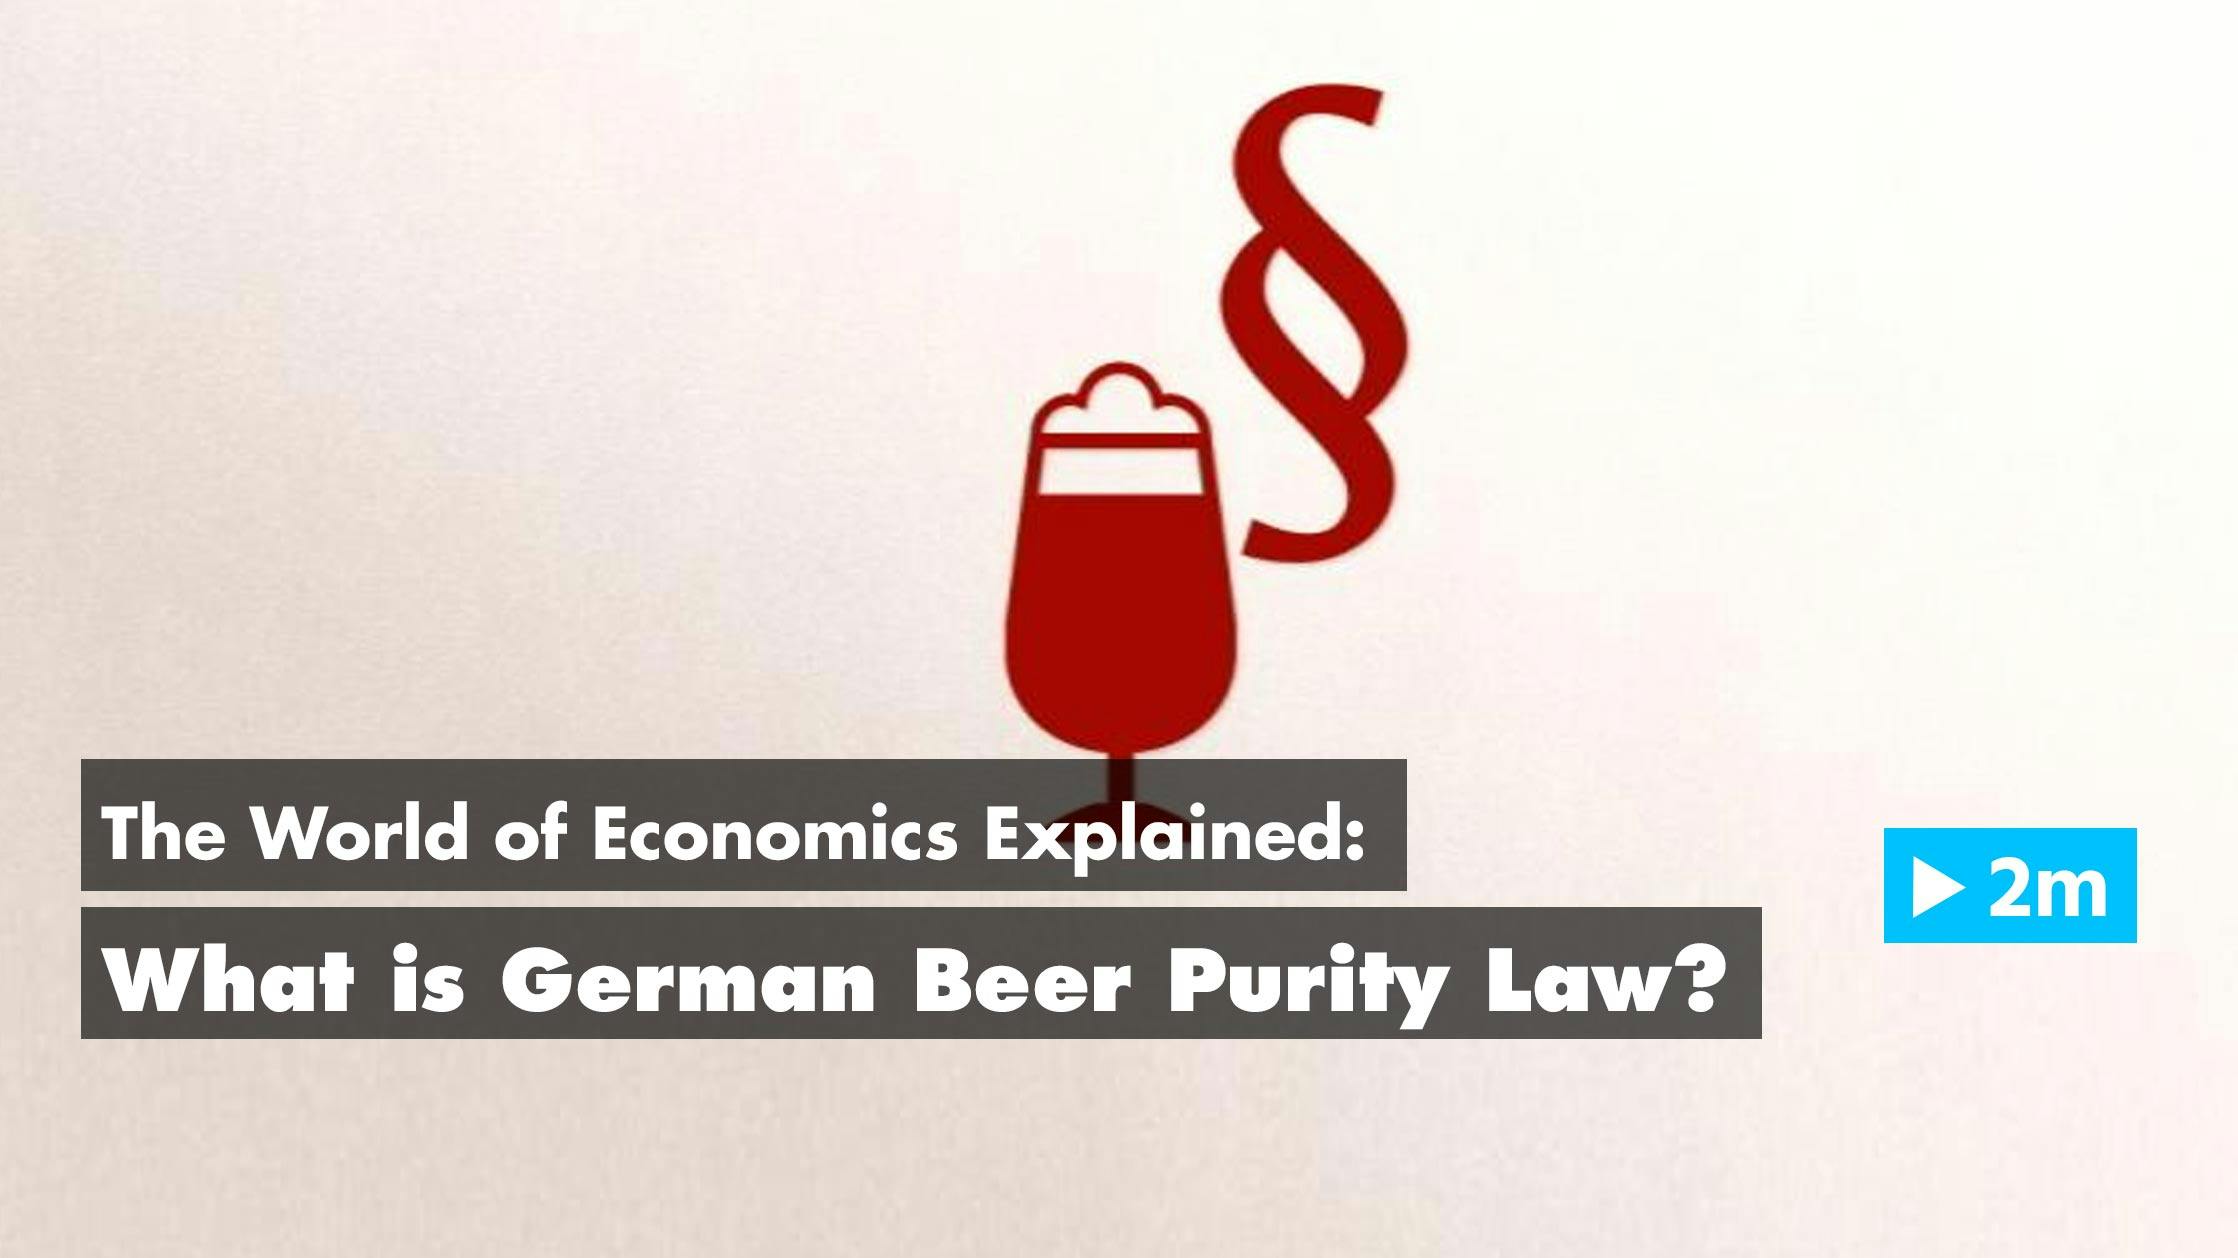 The World of Economics Explained: What is German beer purity law?